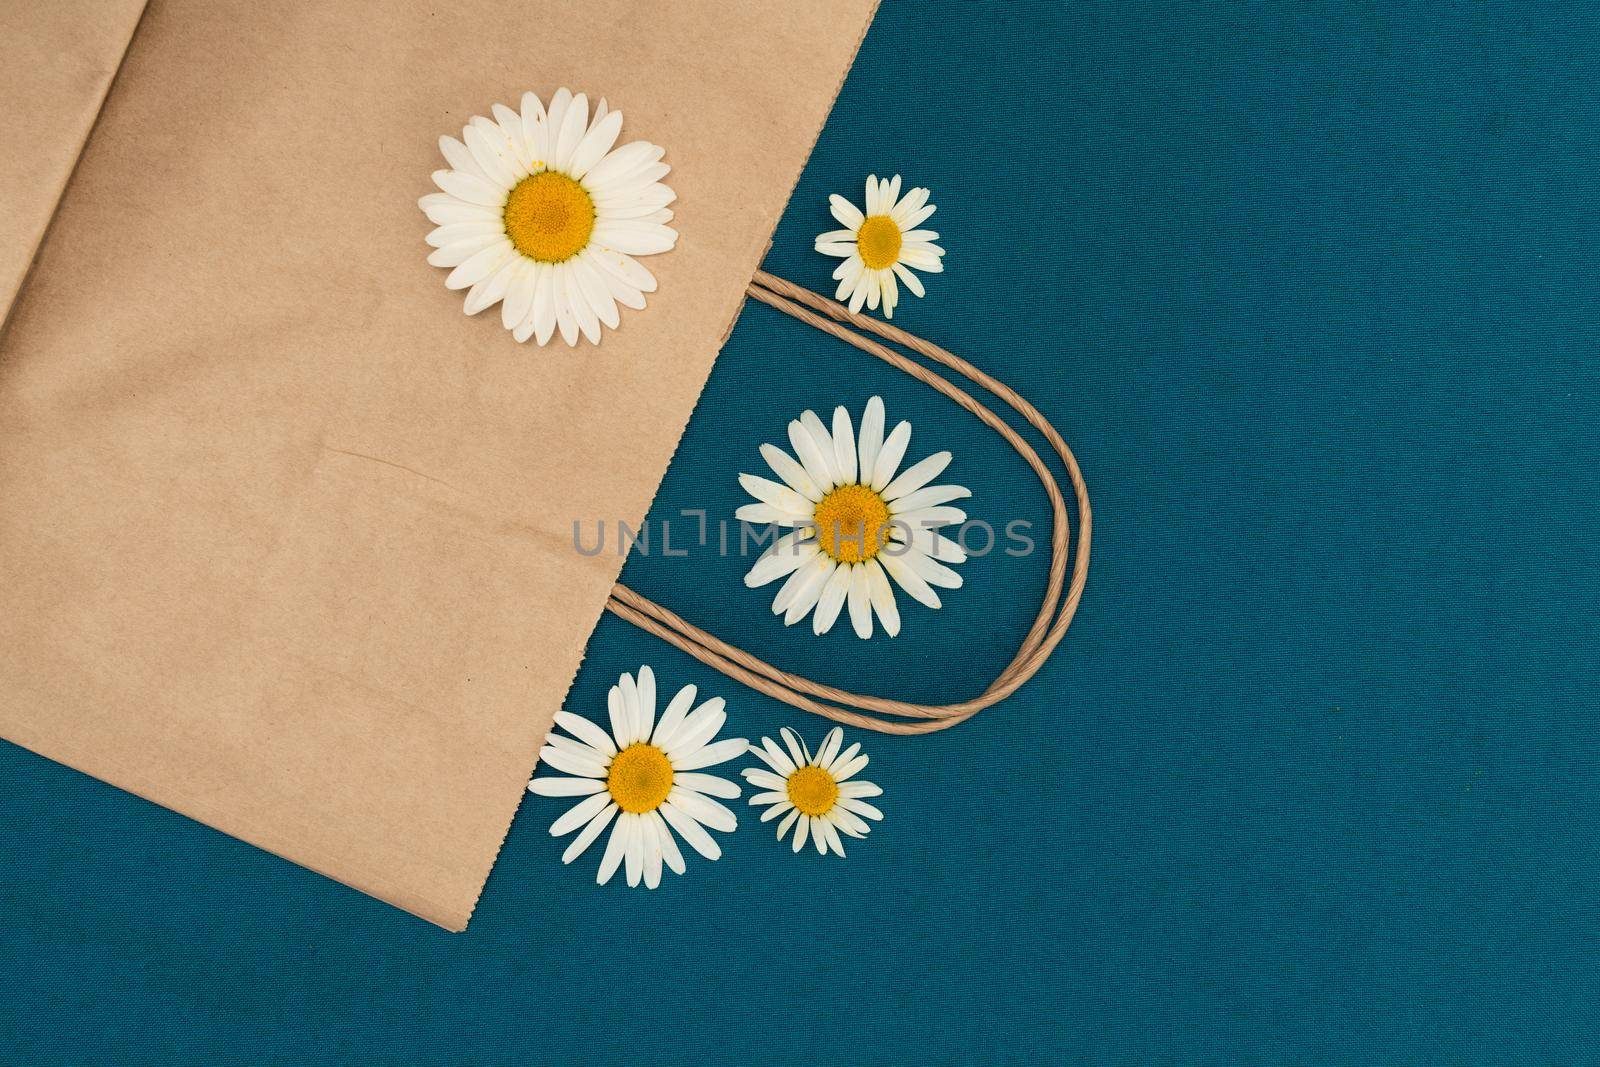 Paper bag on a blue background, decorated with daisies, brown shopping bag. Craft bag with handle. Packaging template mockup. Delivery service concept. Copy space by Matiunina